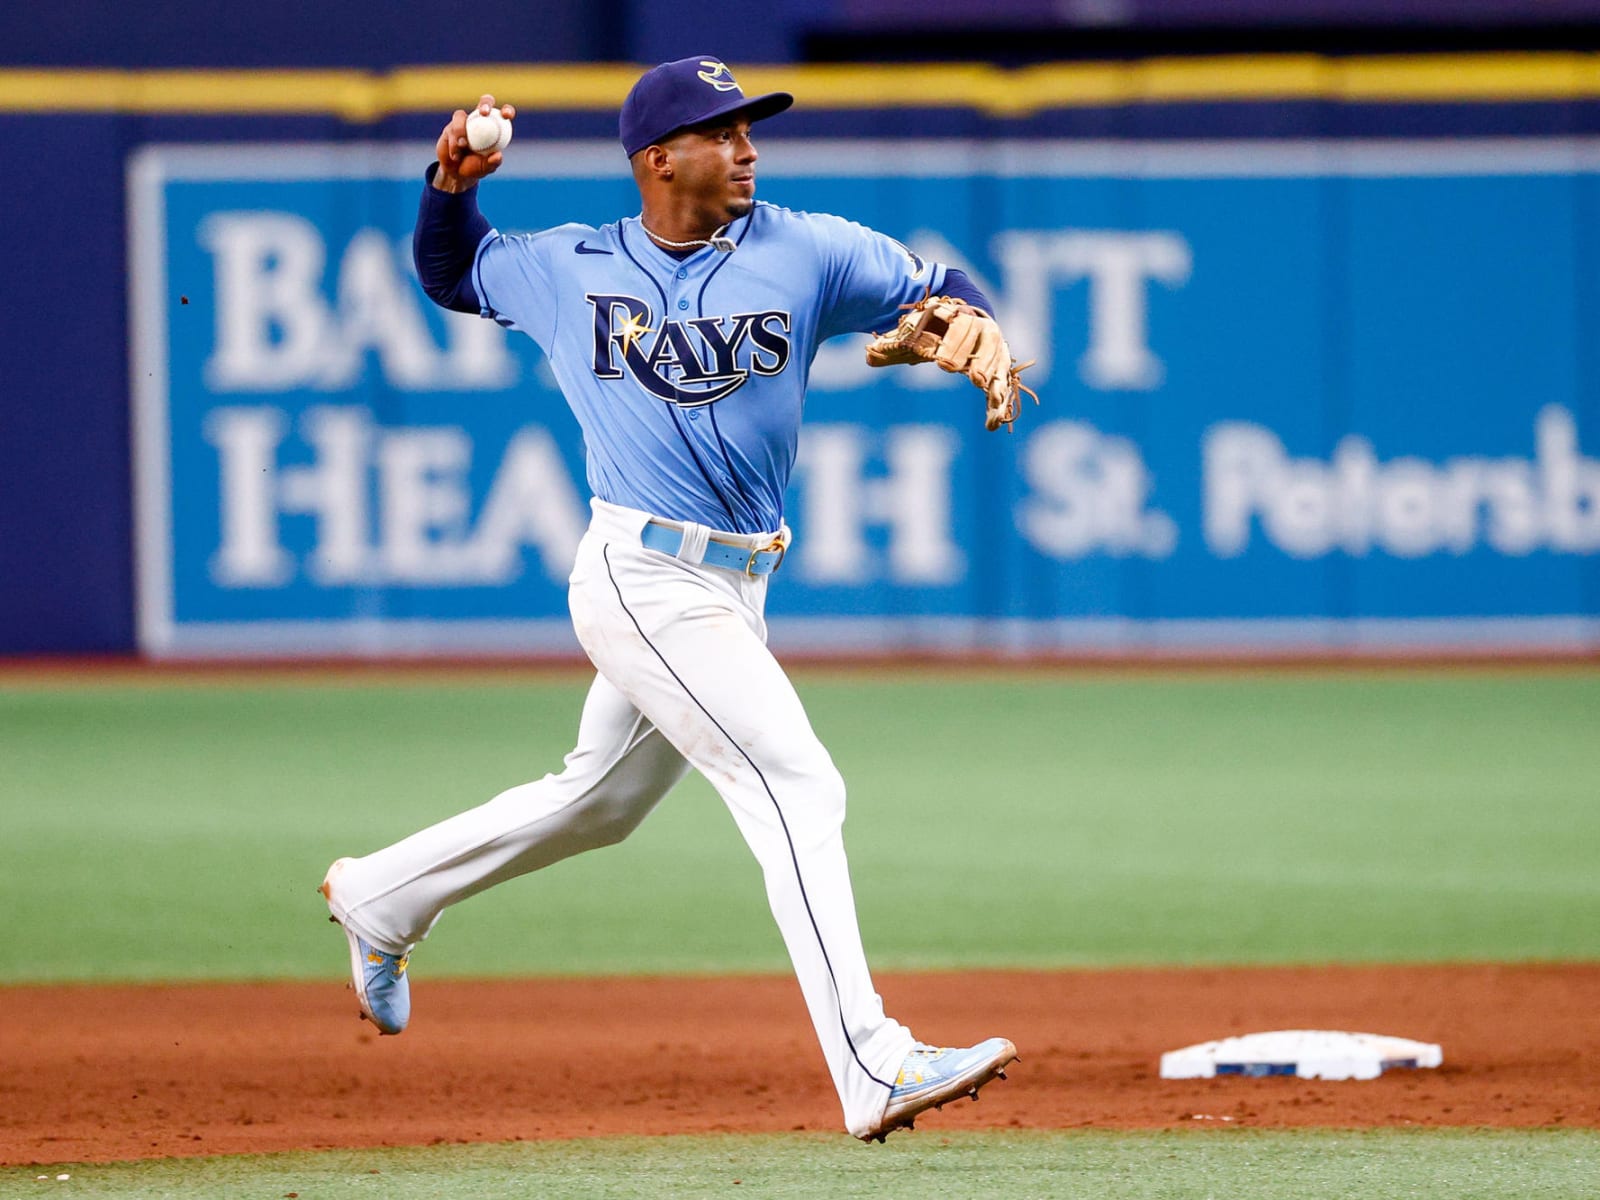 Rays bench SS Wander Franco as manager cites not being 'best